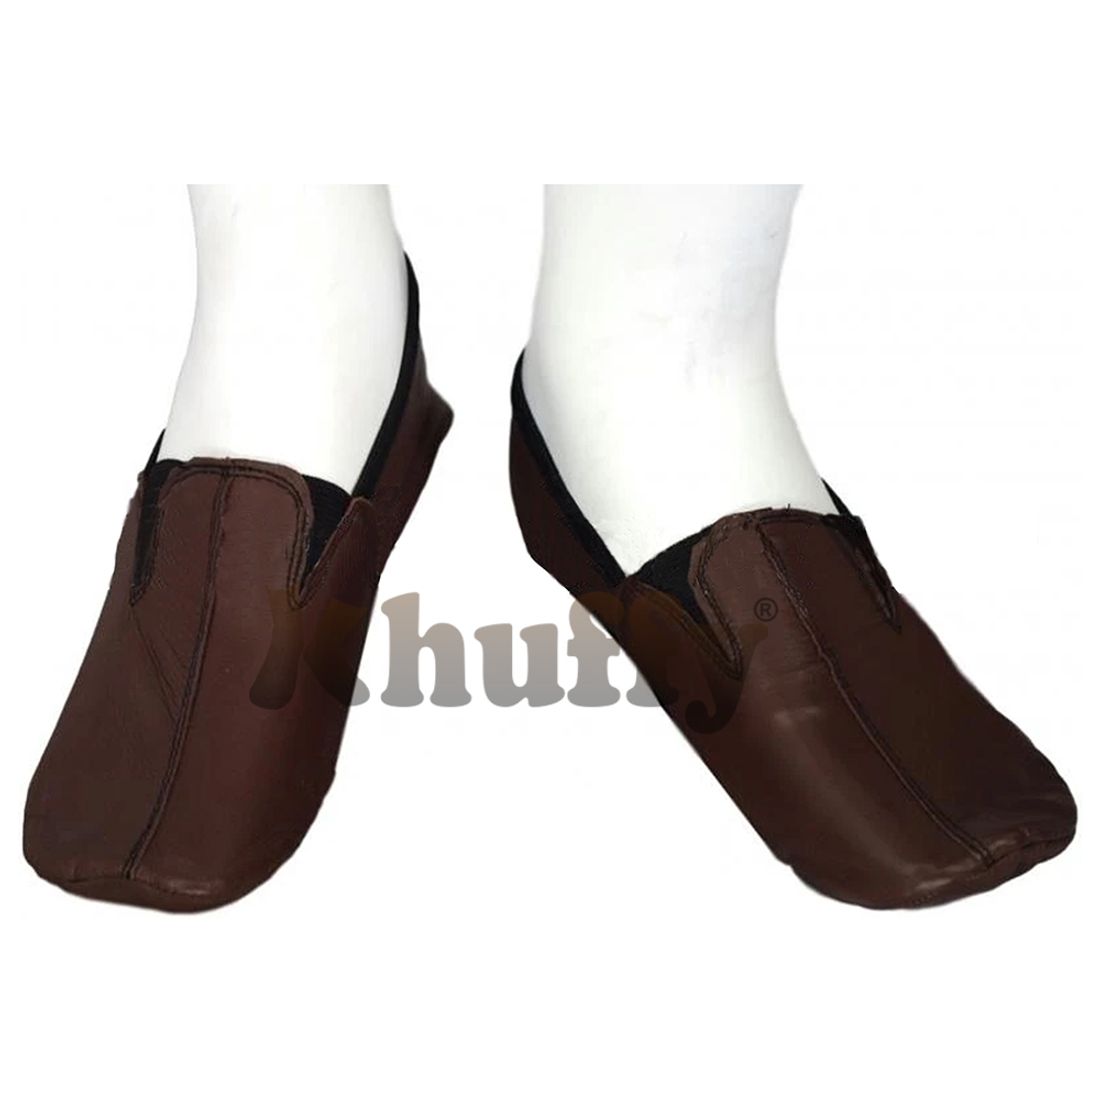 Chocolate Brown Men’s/Women’s Ankle Low-Cut Elastic Slip-On Halal Leather Sunnah Khuff Khuffain Socks for Mosque